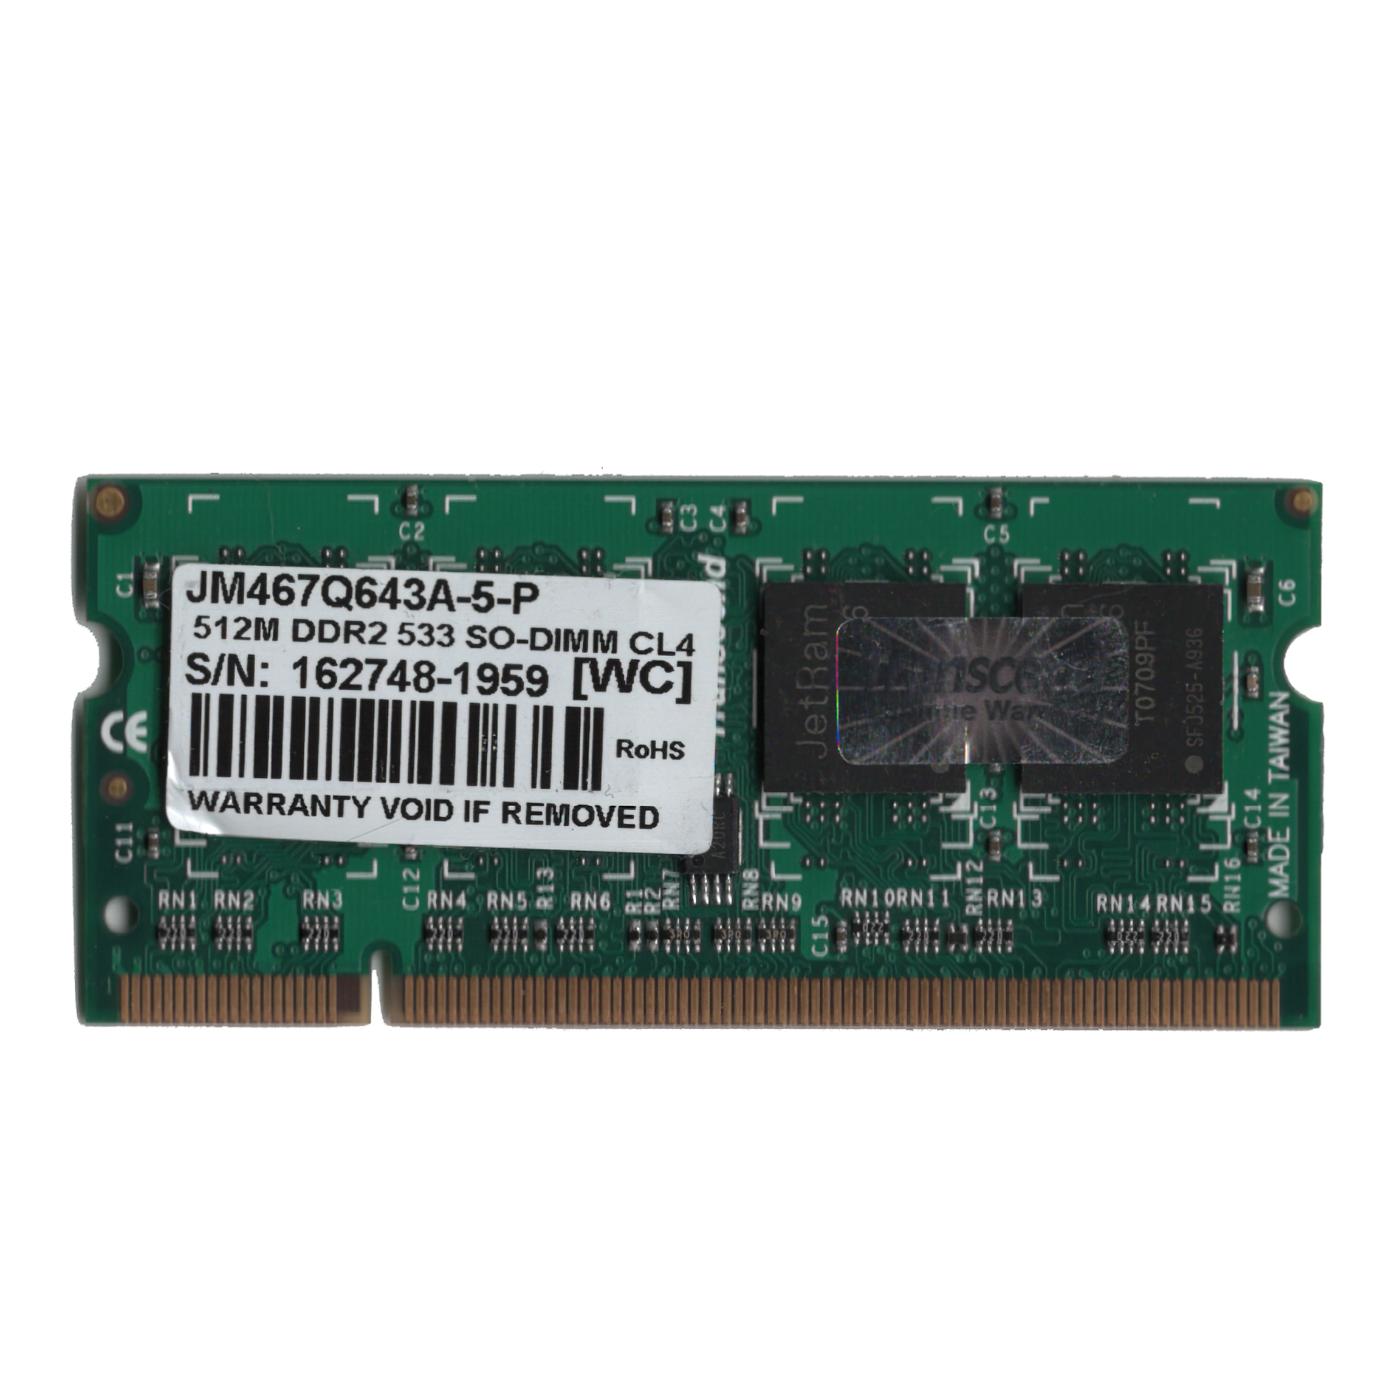 Untested Preowned Transcend 512MB DDR2 533 SO-DIMM CL4 Memory Module